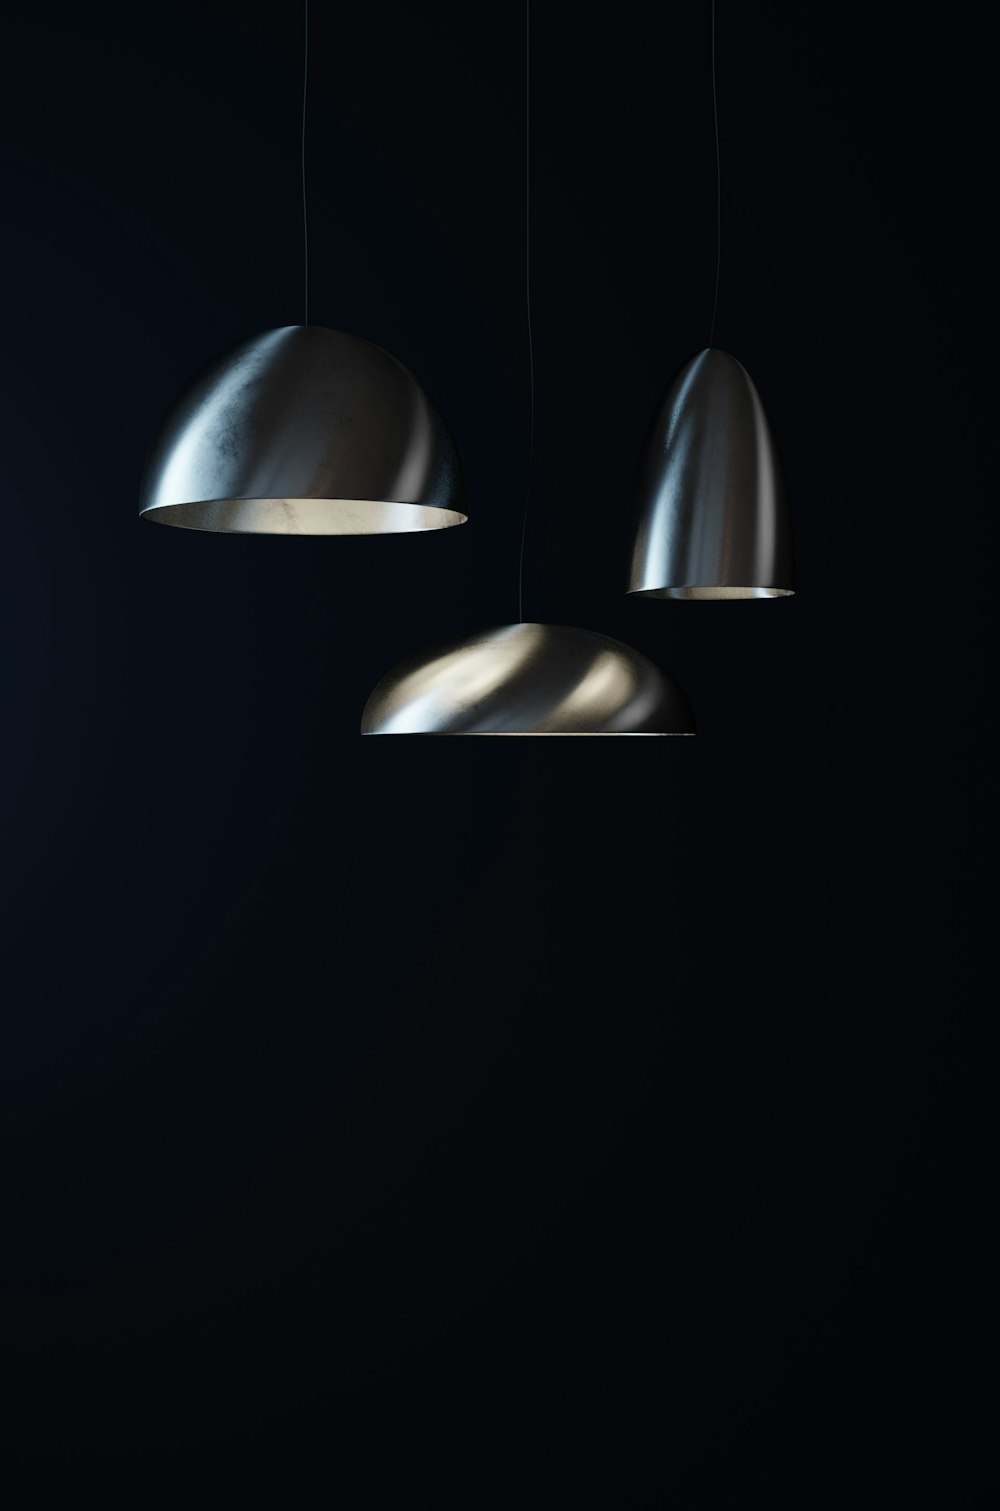 three lights hanging from a ceiling in a dark room